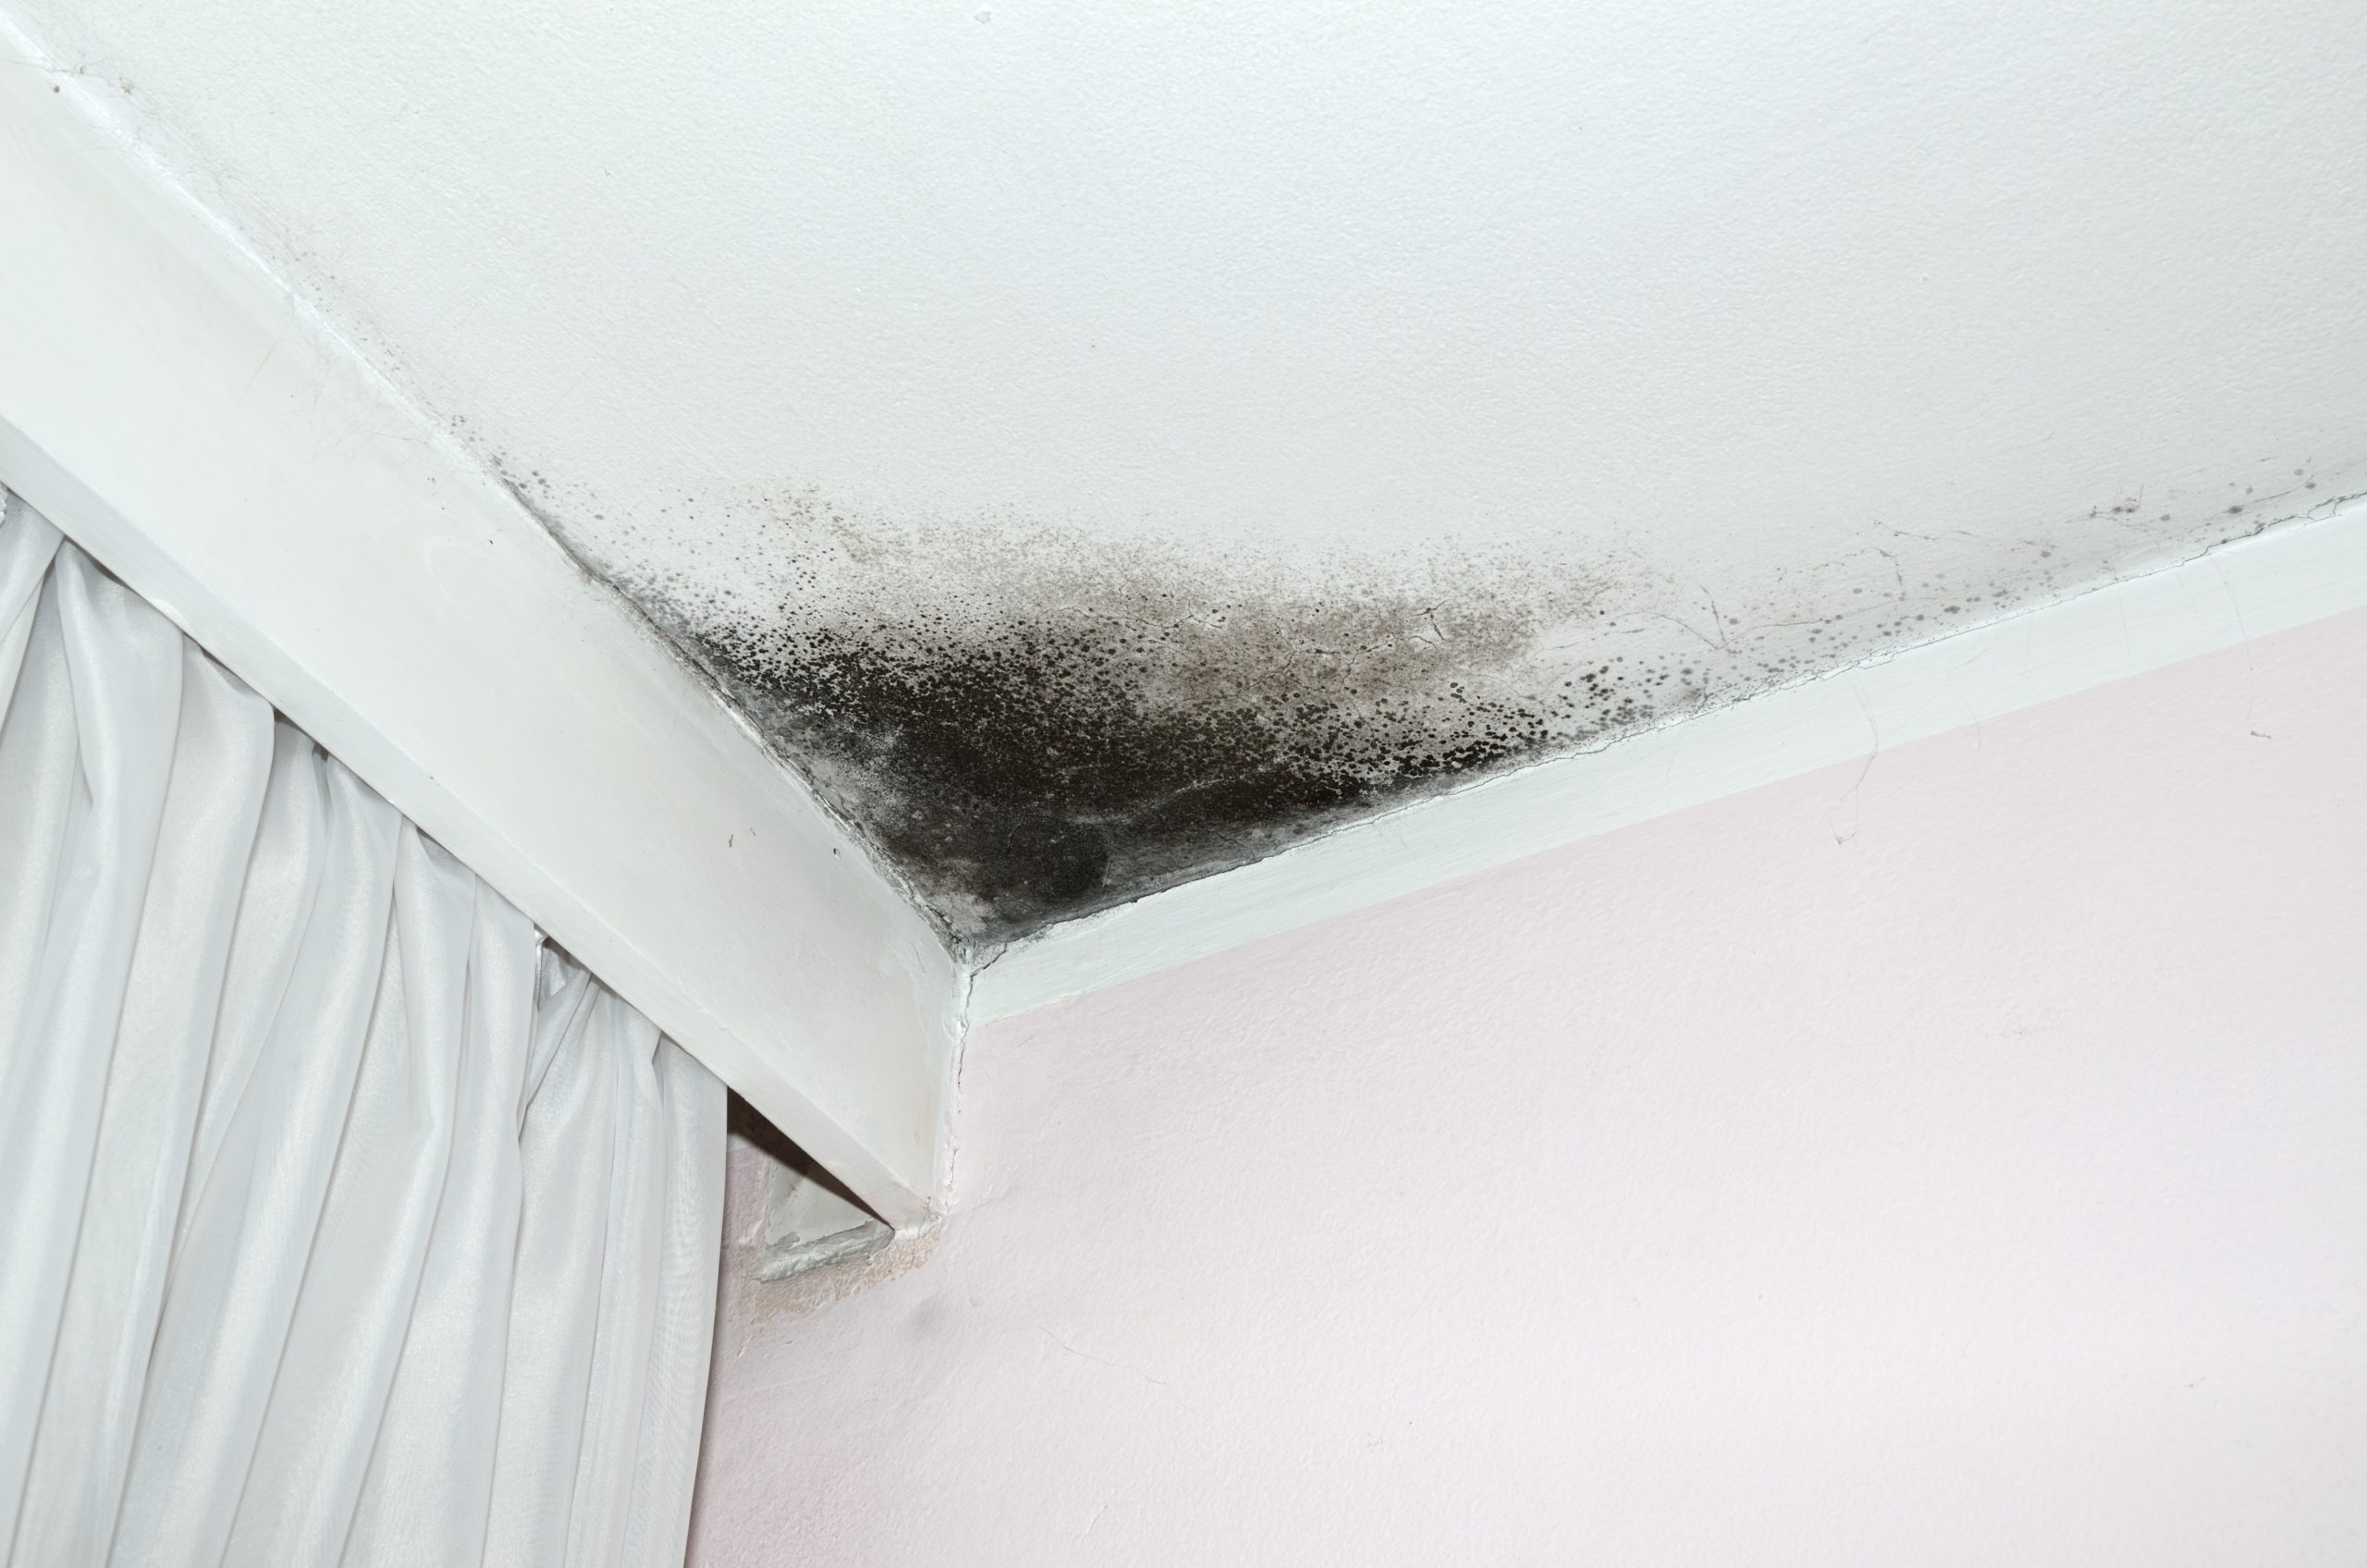 Black Mold In My Living Room Ceiling